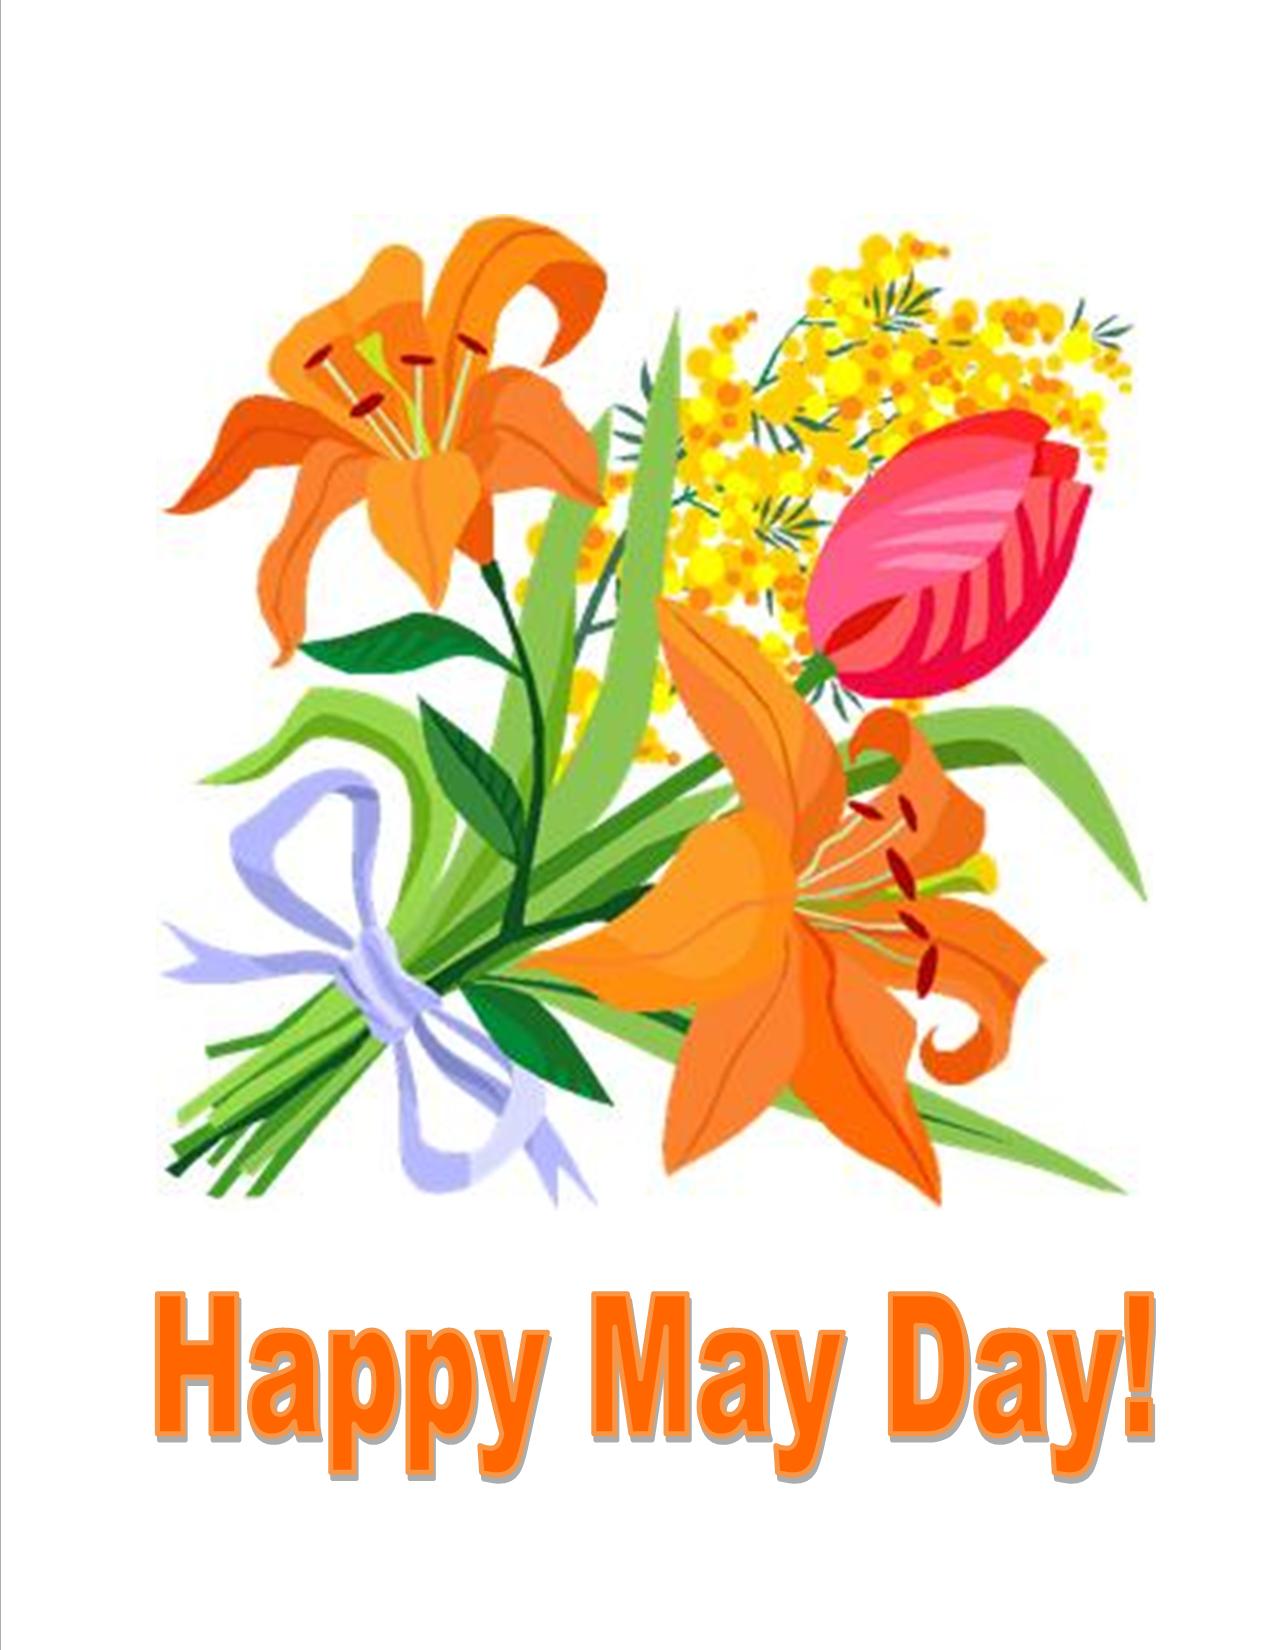 Happy May Day Flowers Picture For Facebook